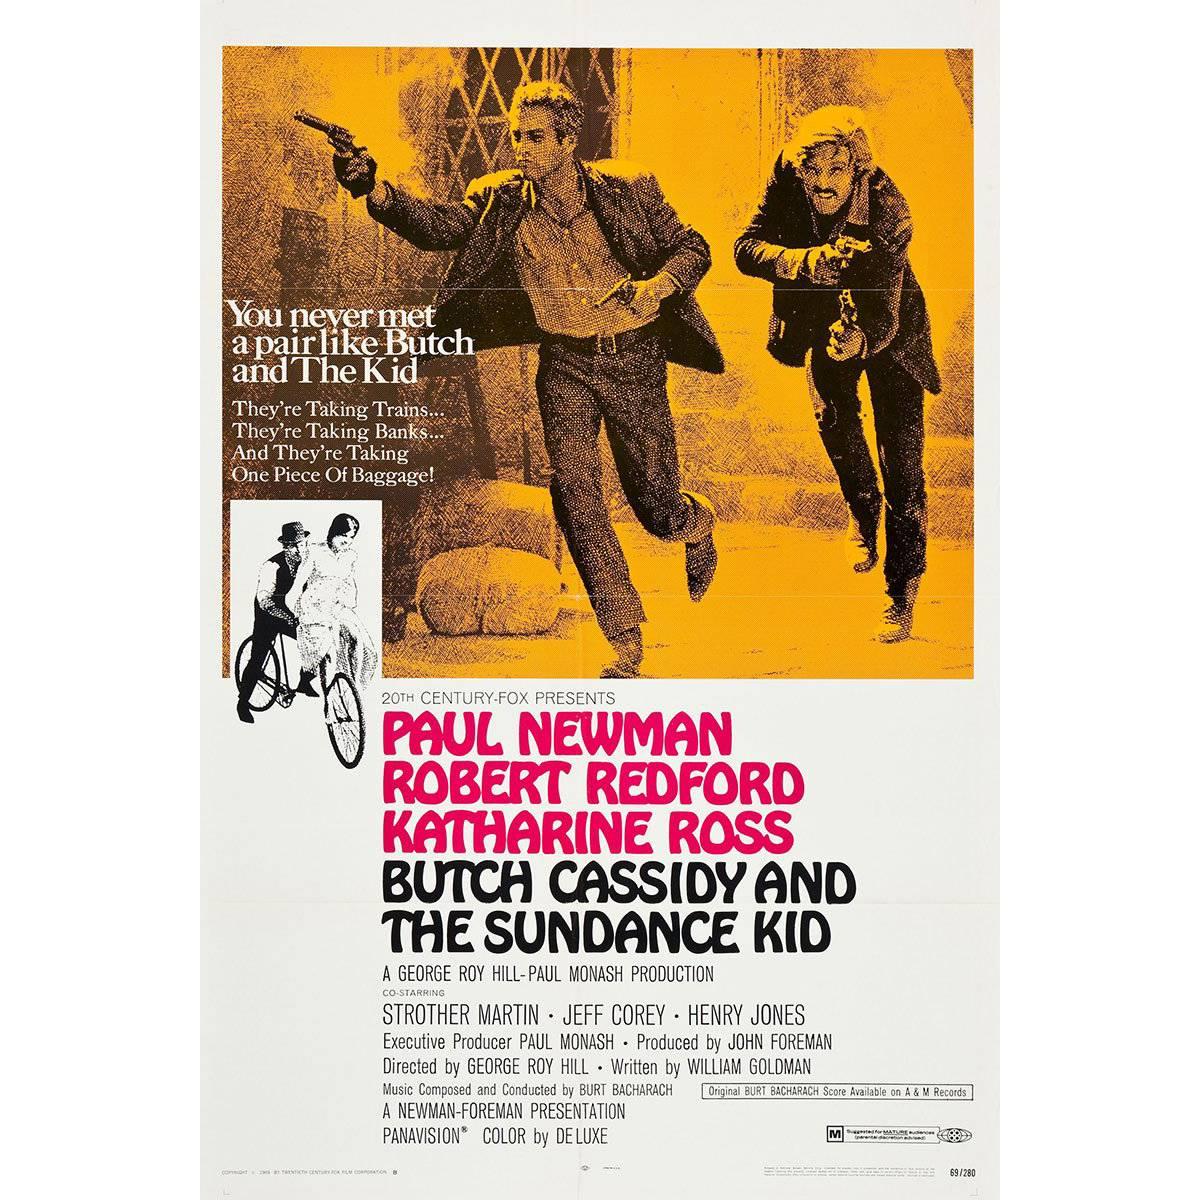 "Butch Cassidy and the Sundance Kid", Film Poster, 1969 For Sale